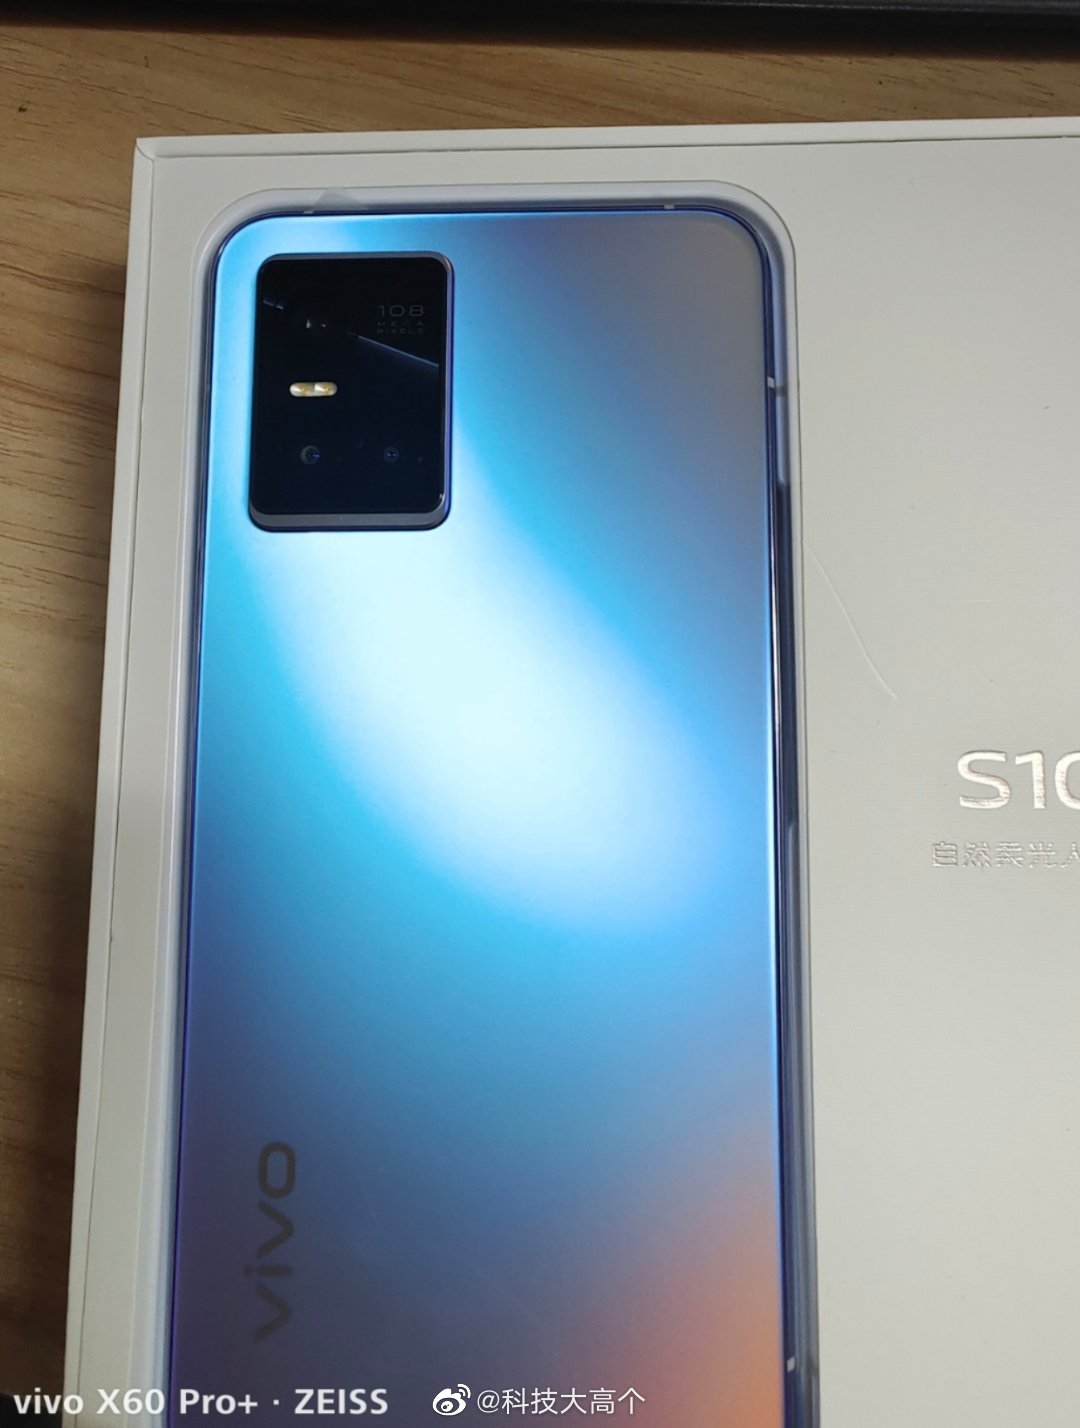 Vivo S10 tipped with Dimensity 1100 SoC, 108MP camera, & 44W fast charging tech